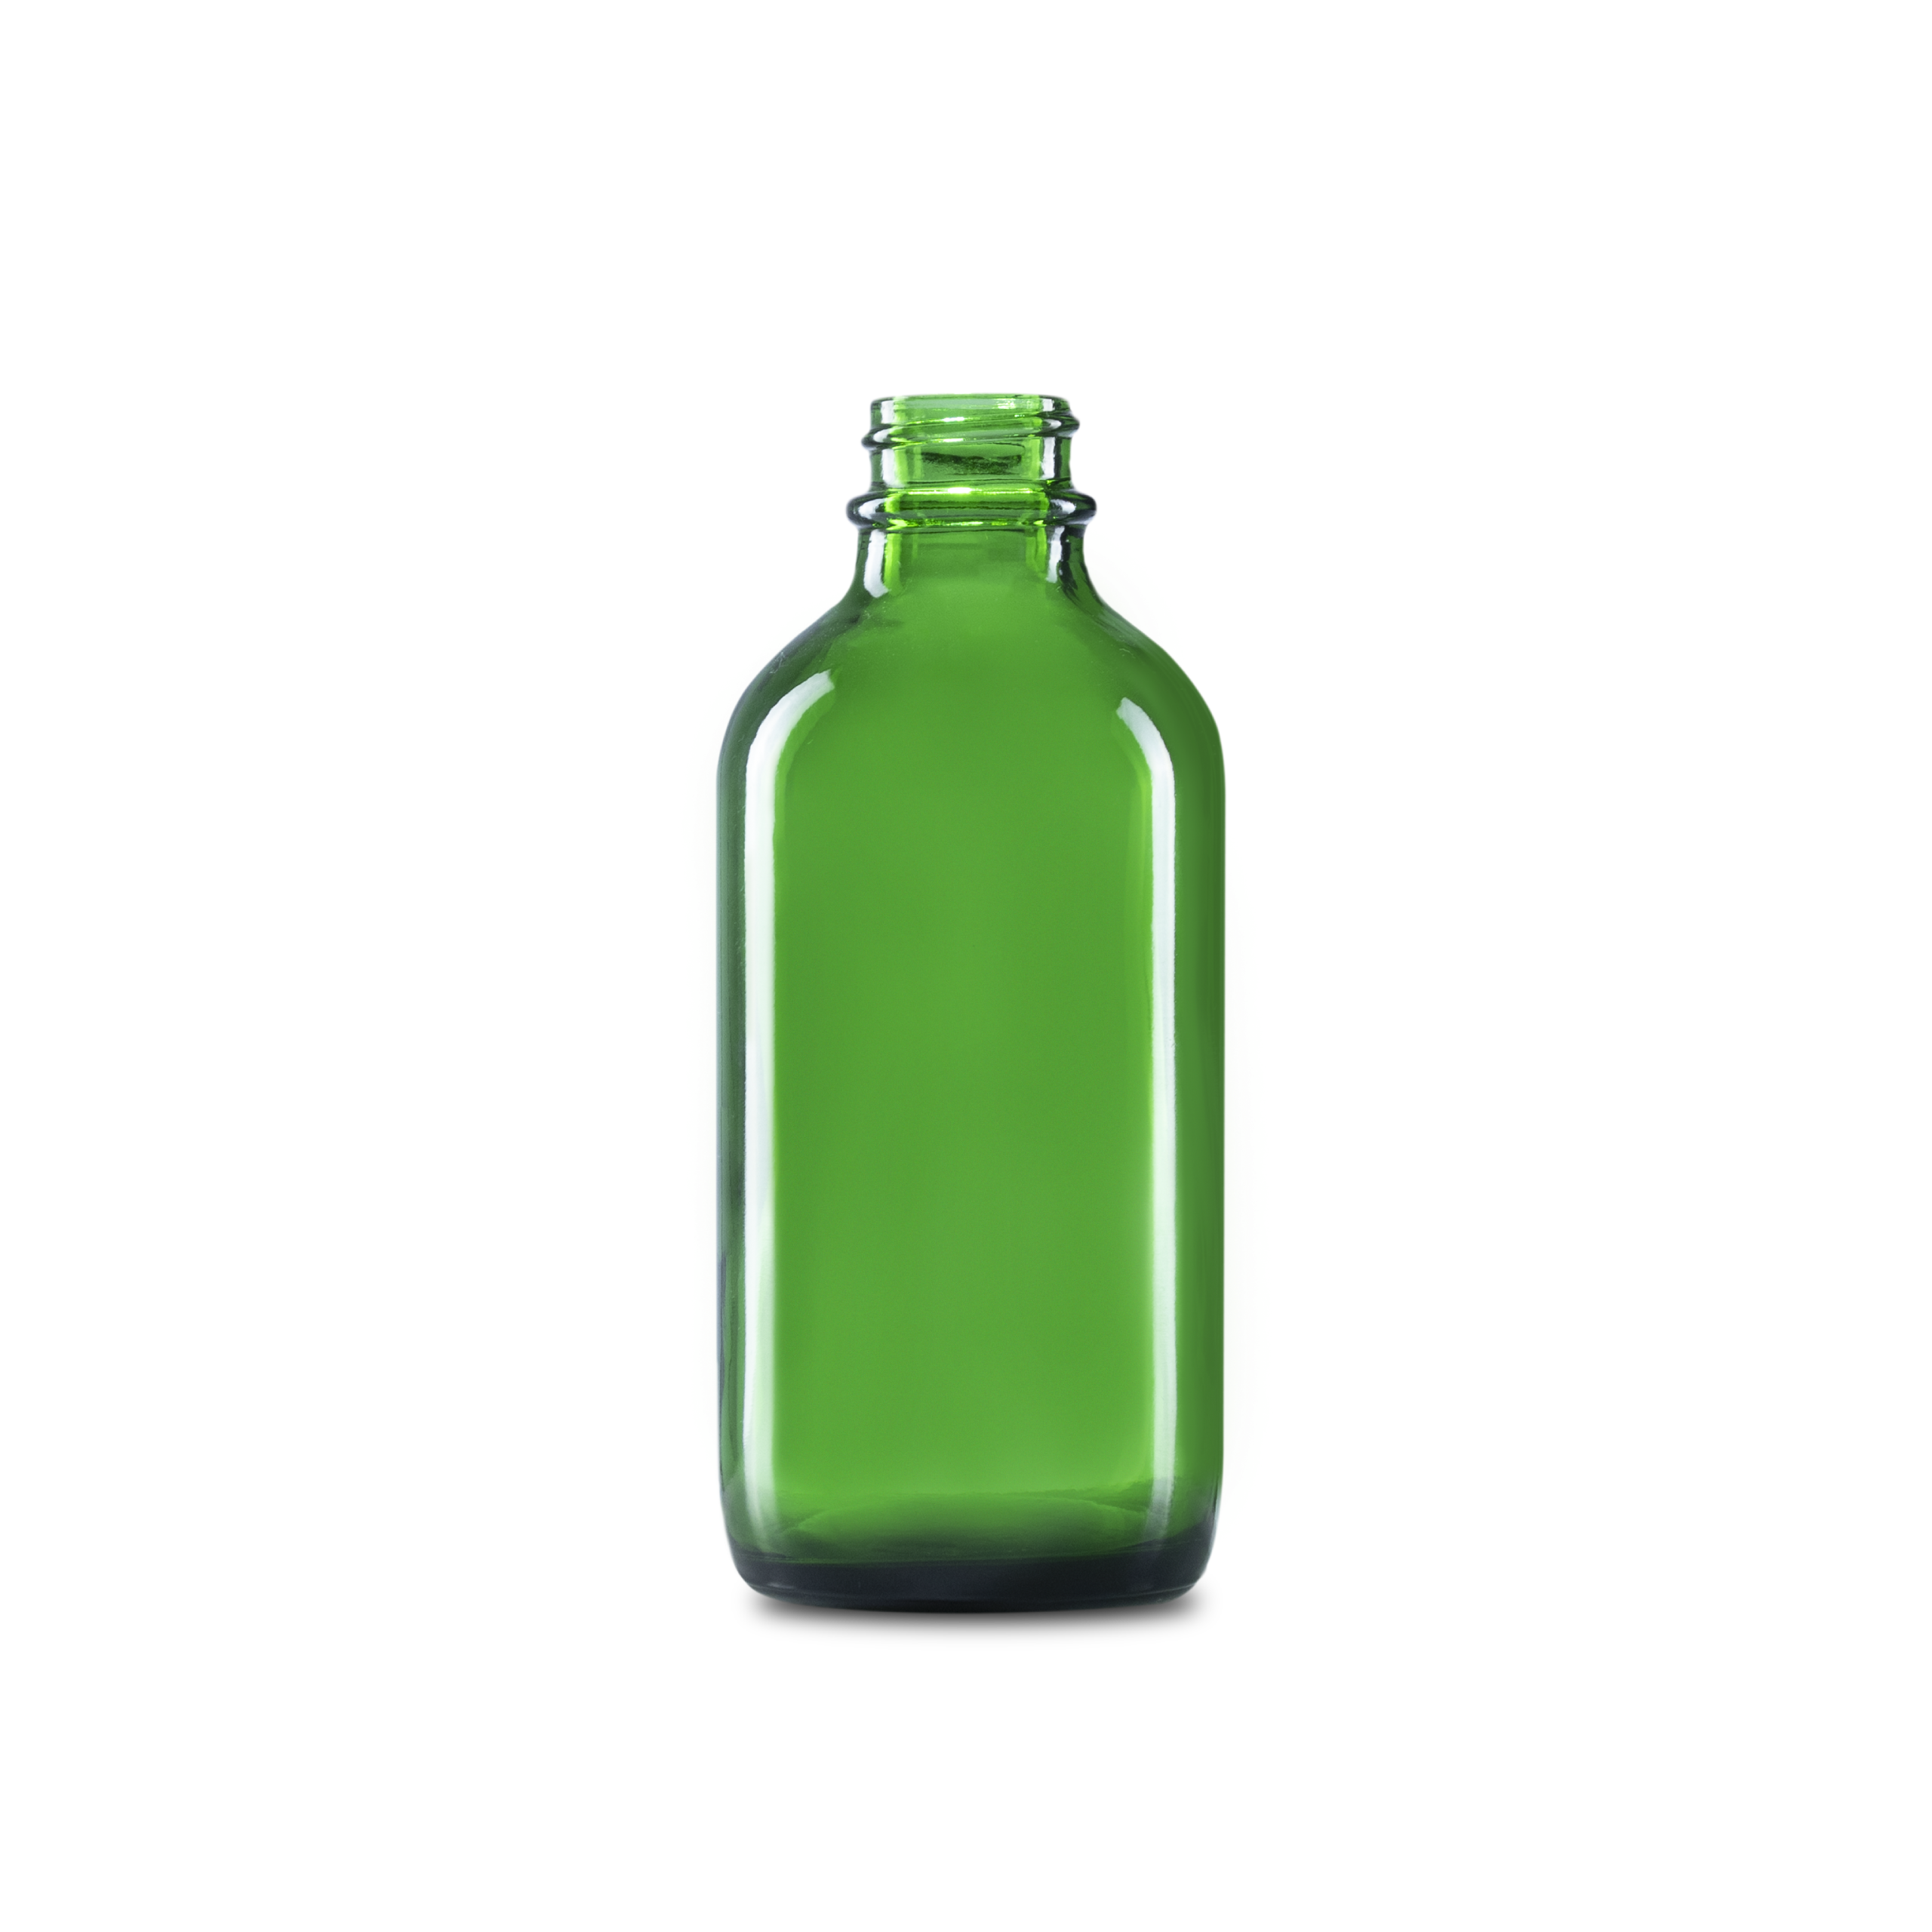 4 oz green boston round glass bottle are perfect for storing homemade sauces, vinegars, oils, syrups and more.